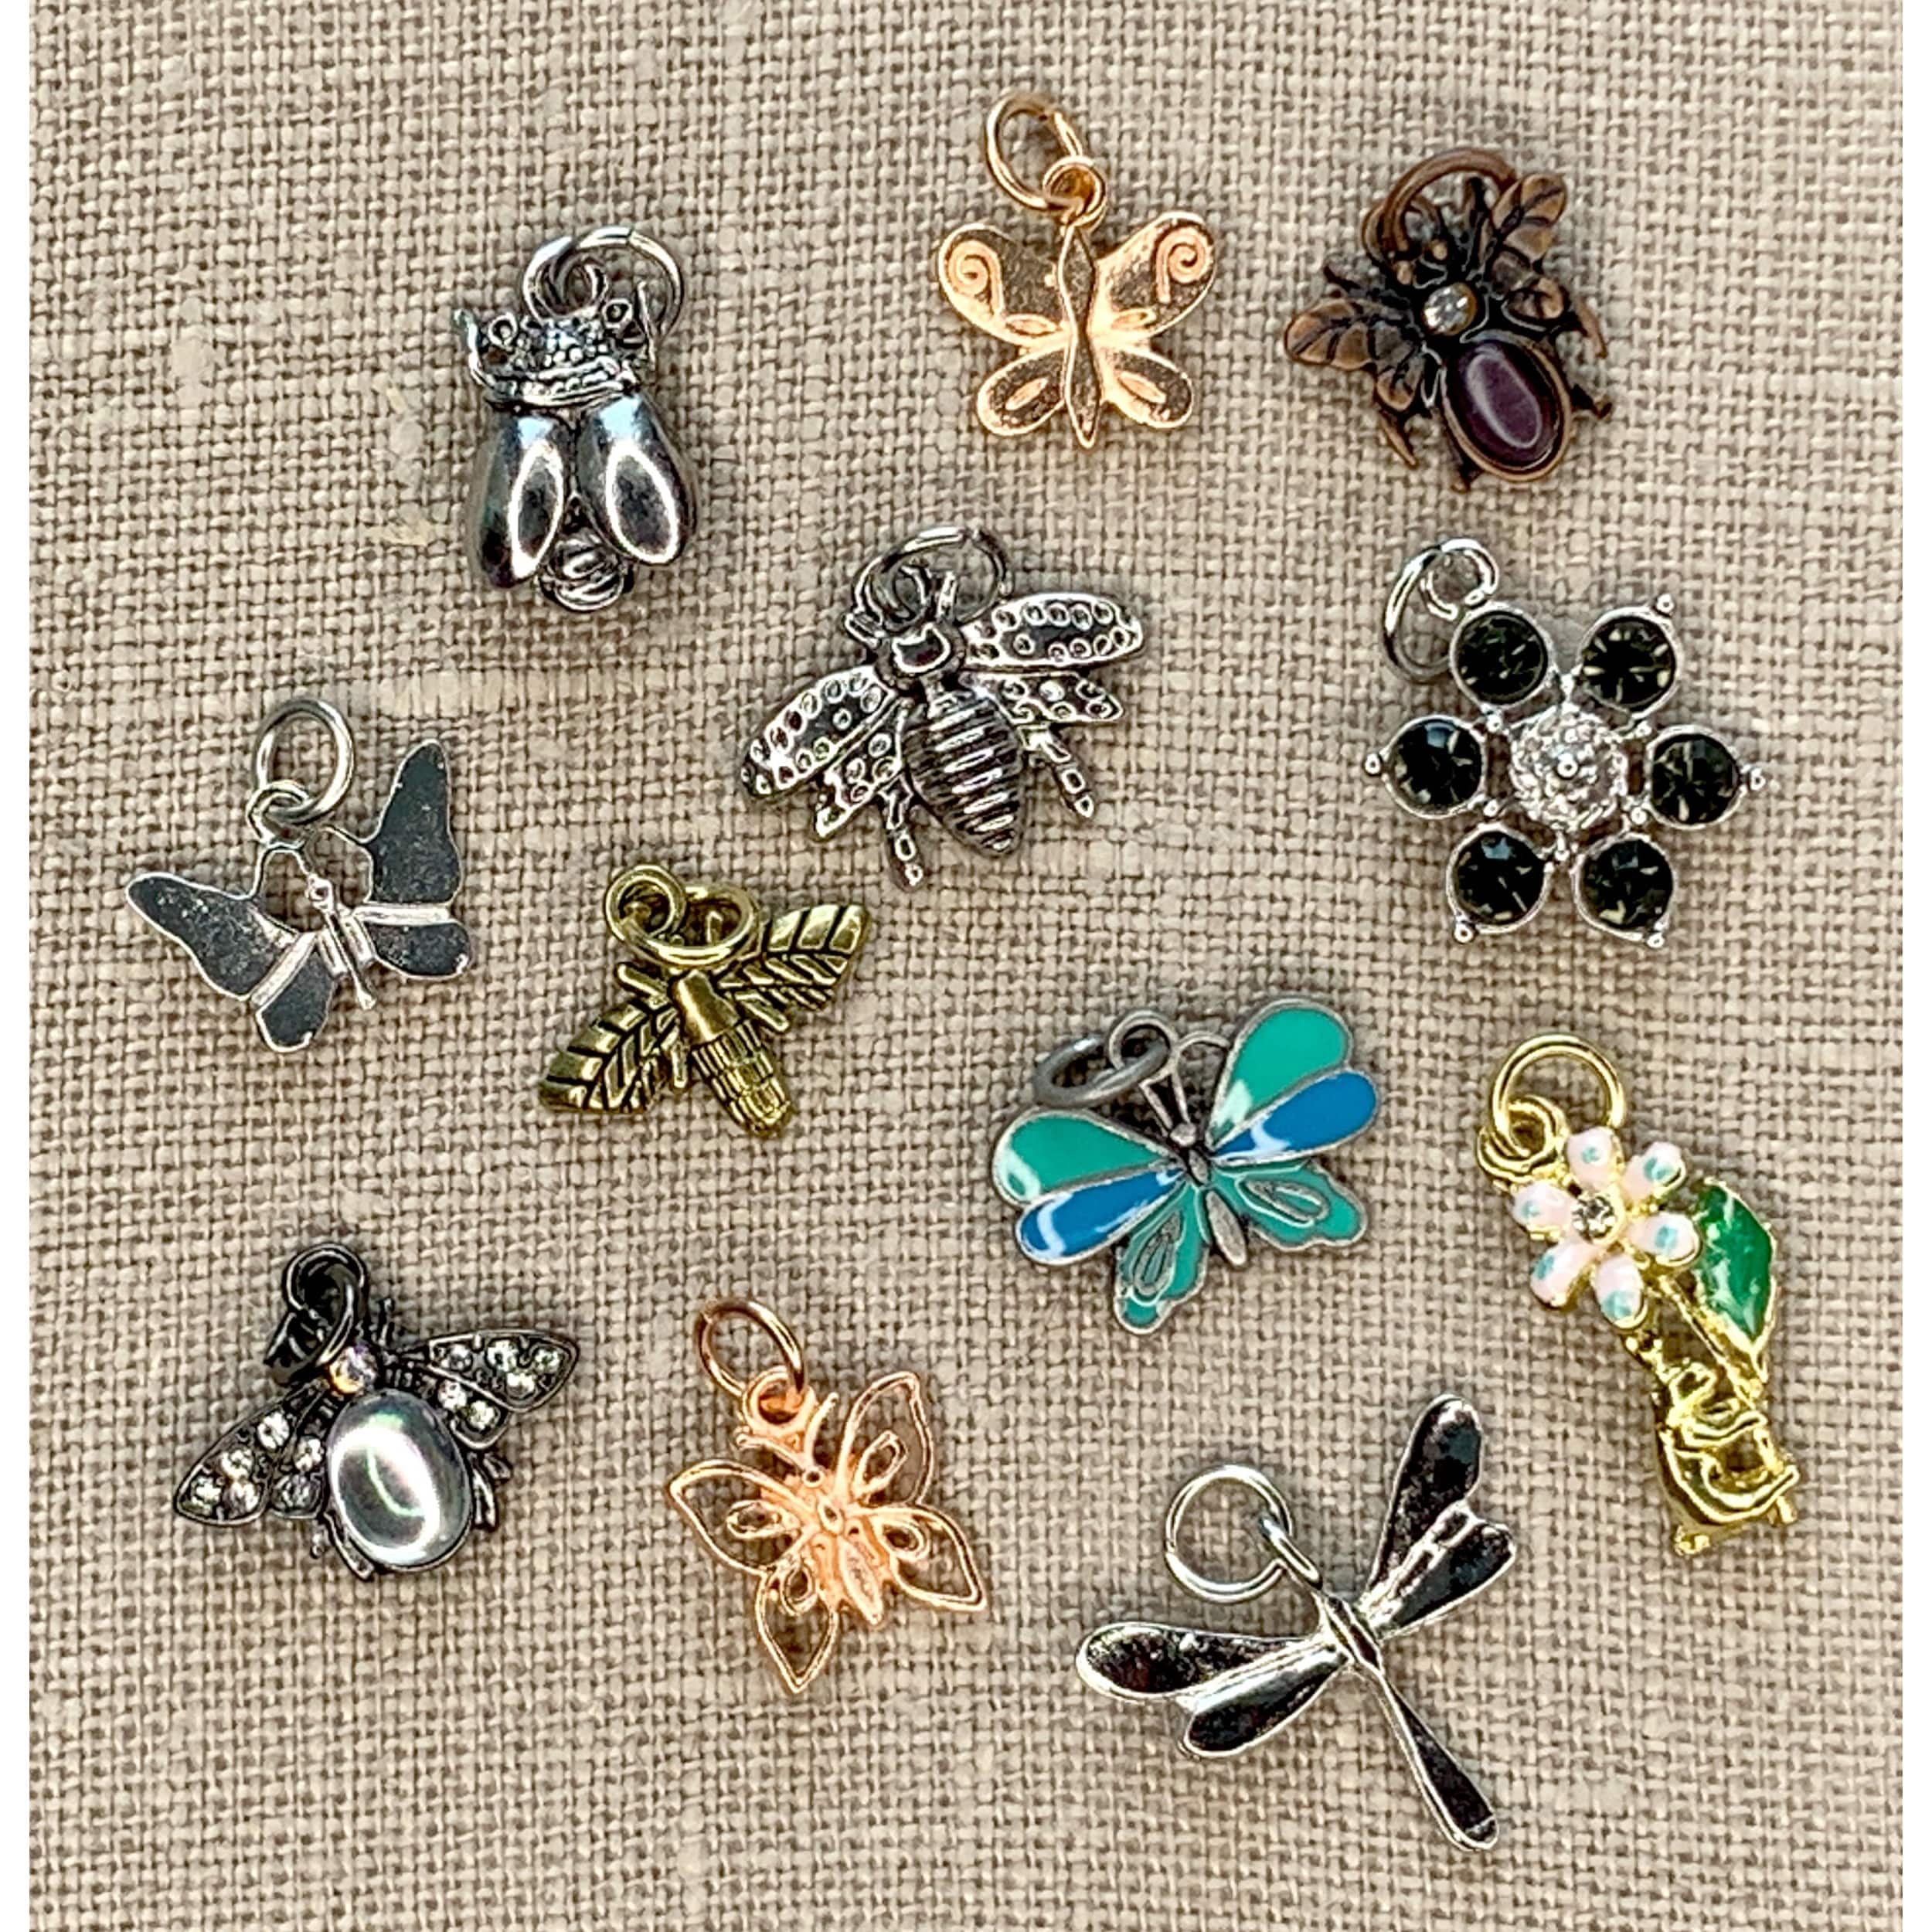 Jewelry Made By Me Bugs Charms, 12ct.